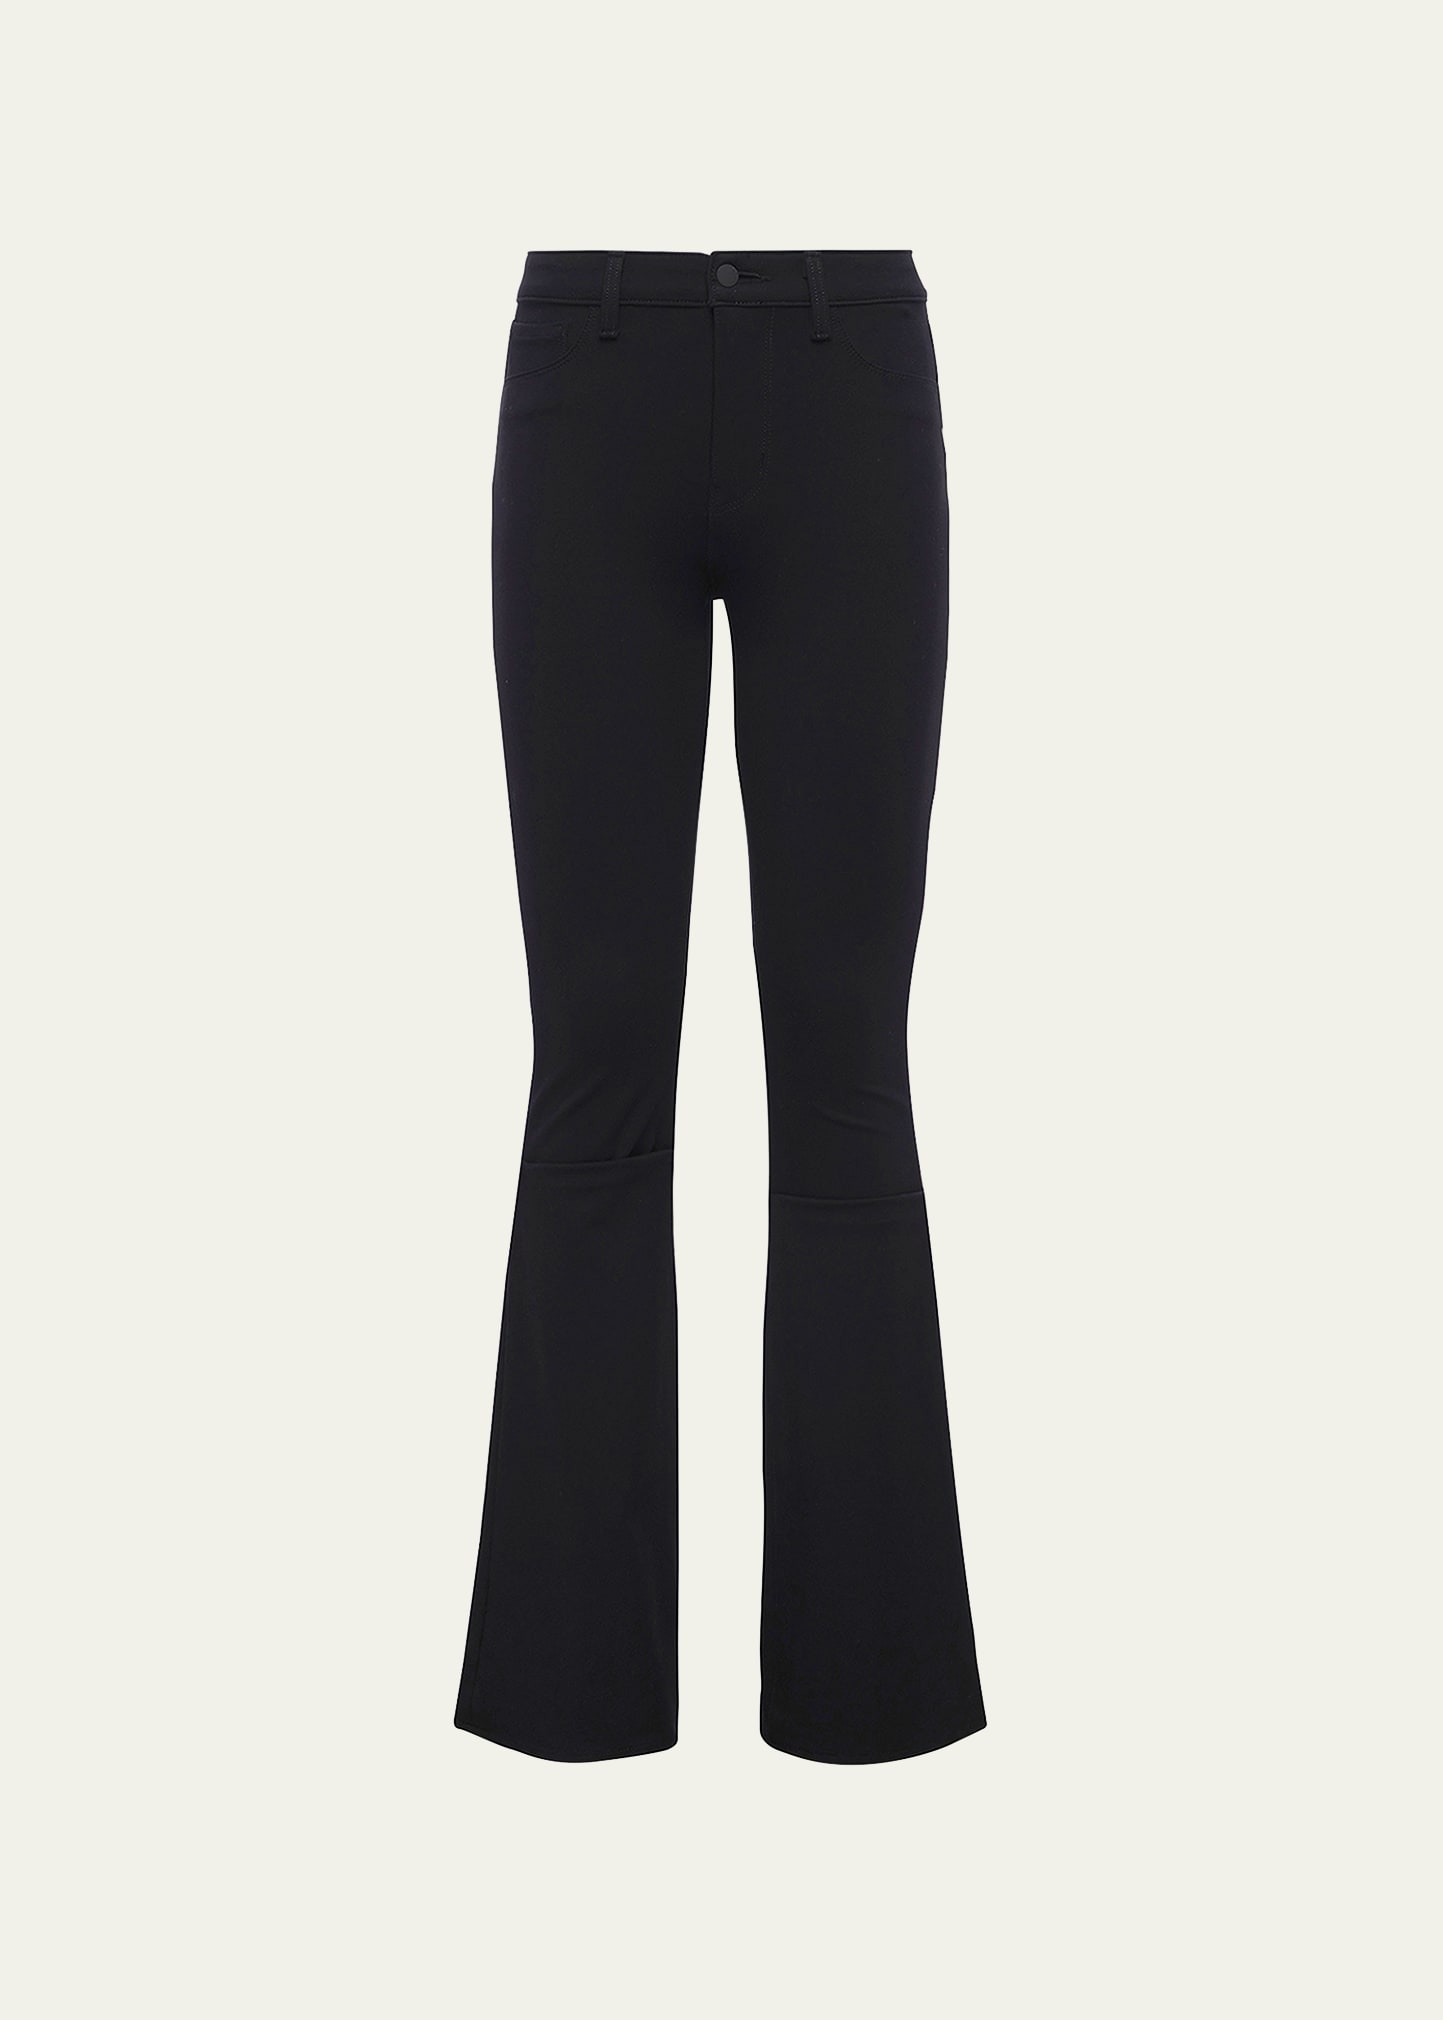 L Agence Marty High Rise Flare Jeans In Black